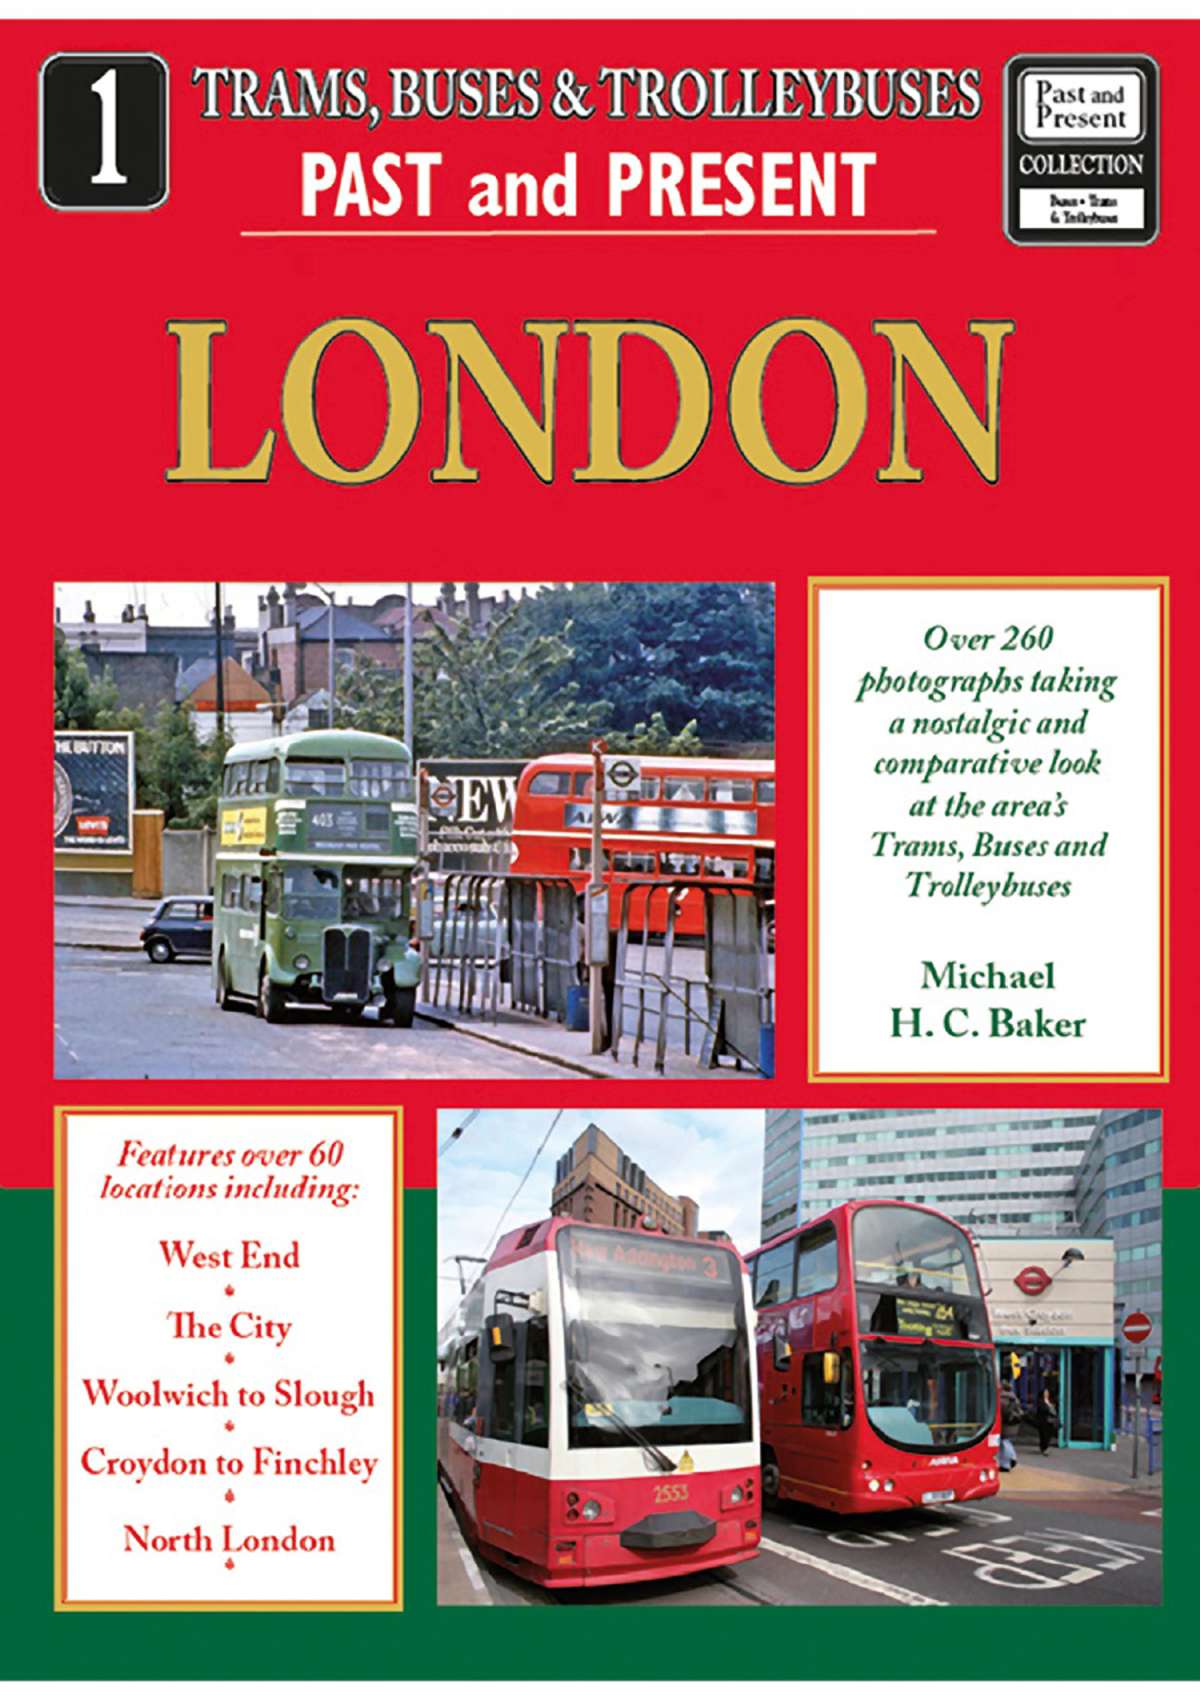 2666 - Trams, Buses and Trolleybuses No 1: London